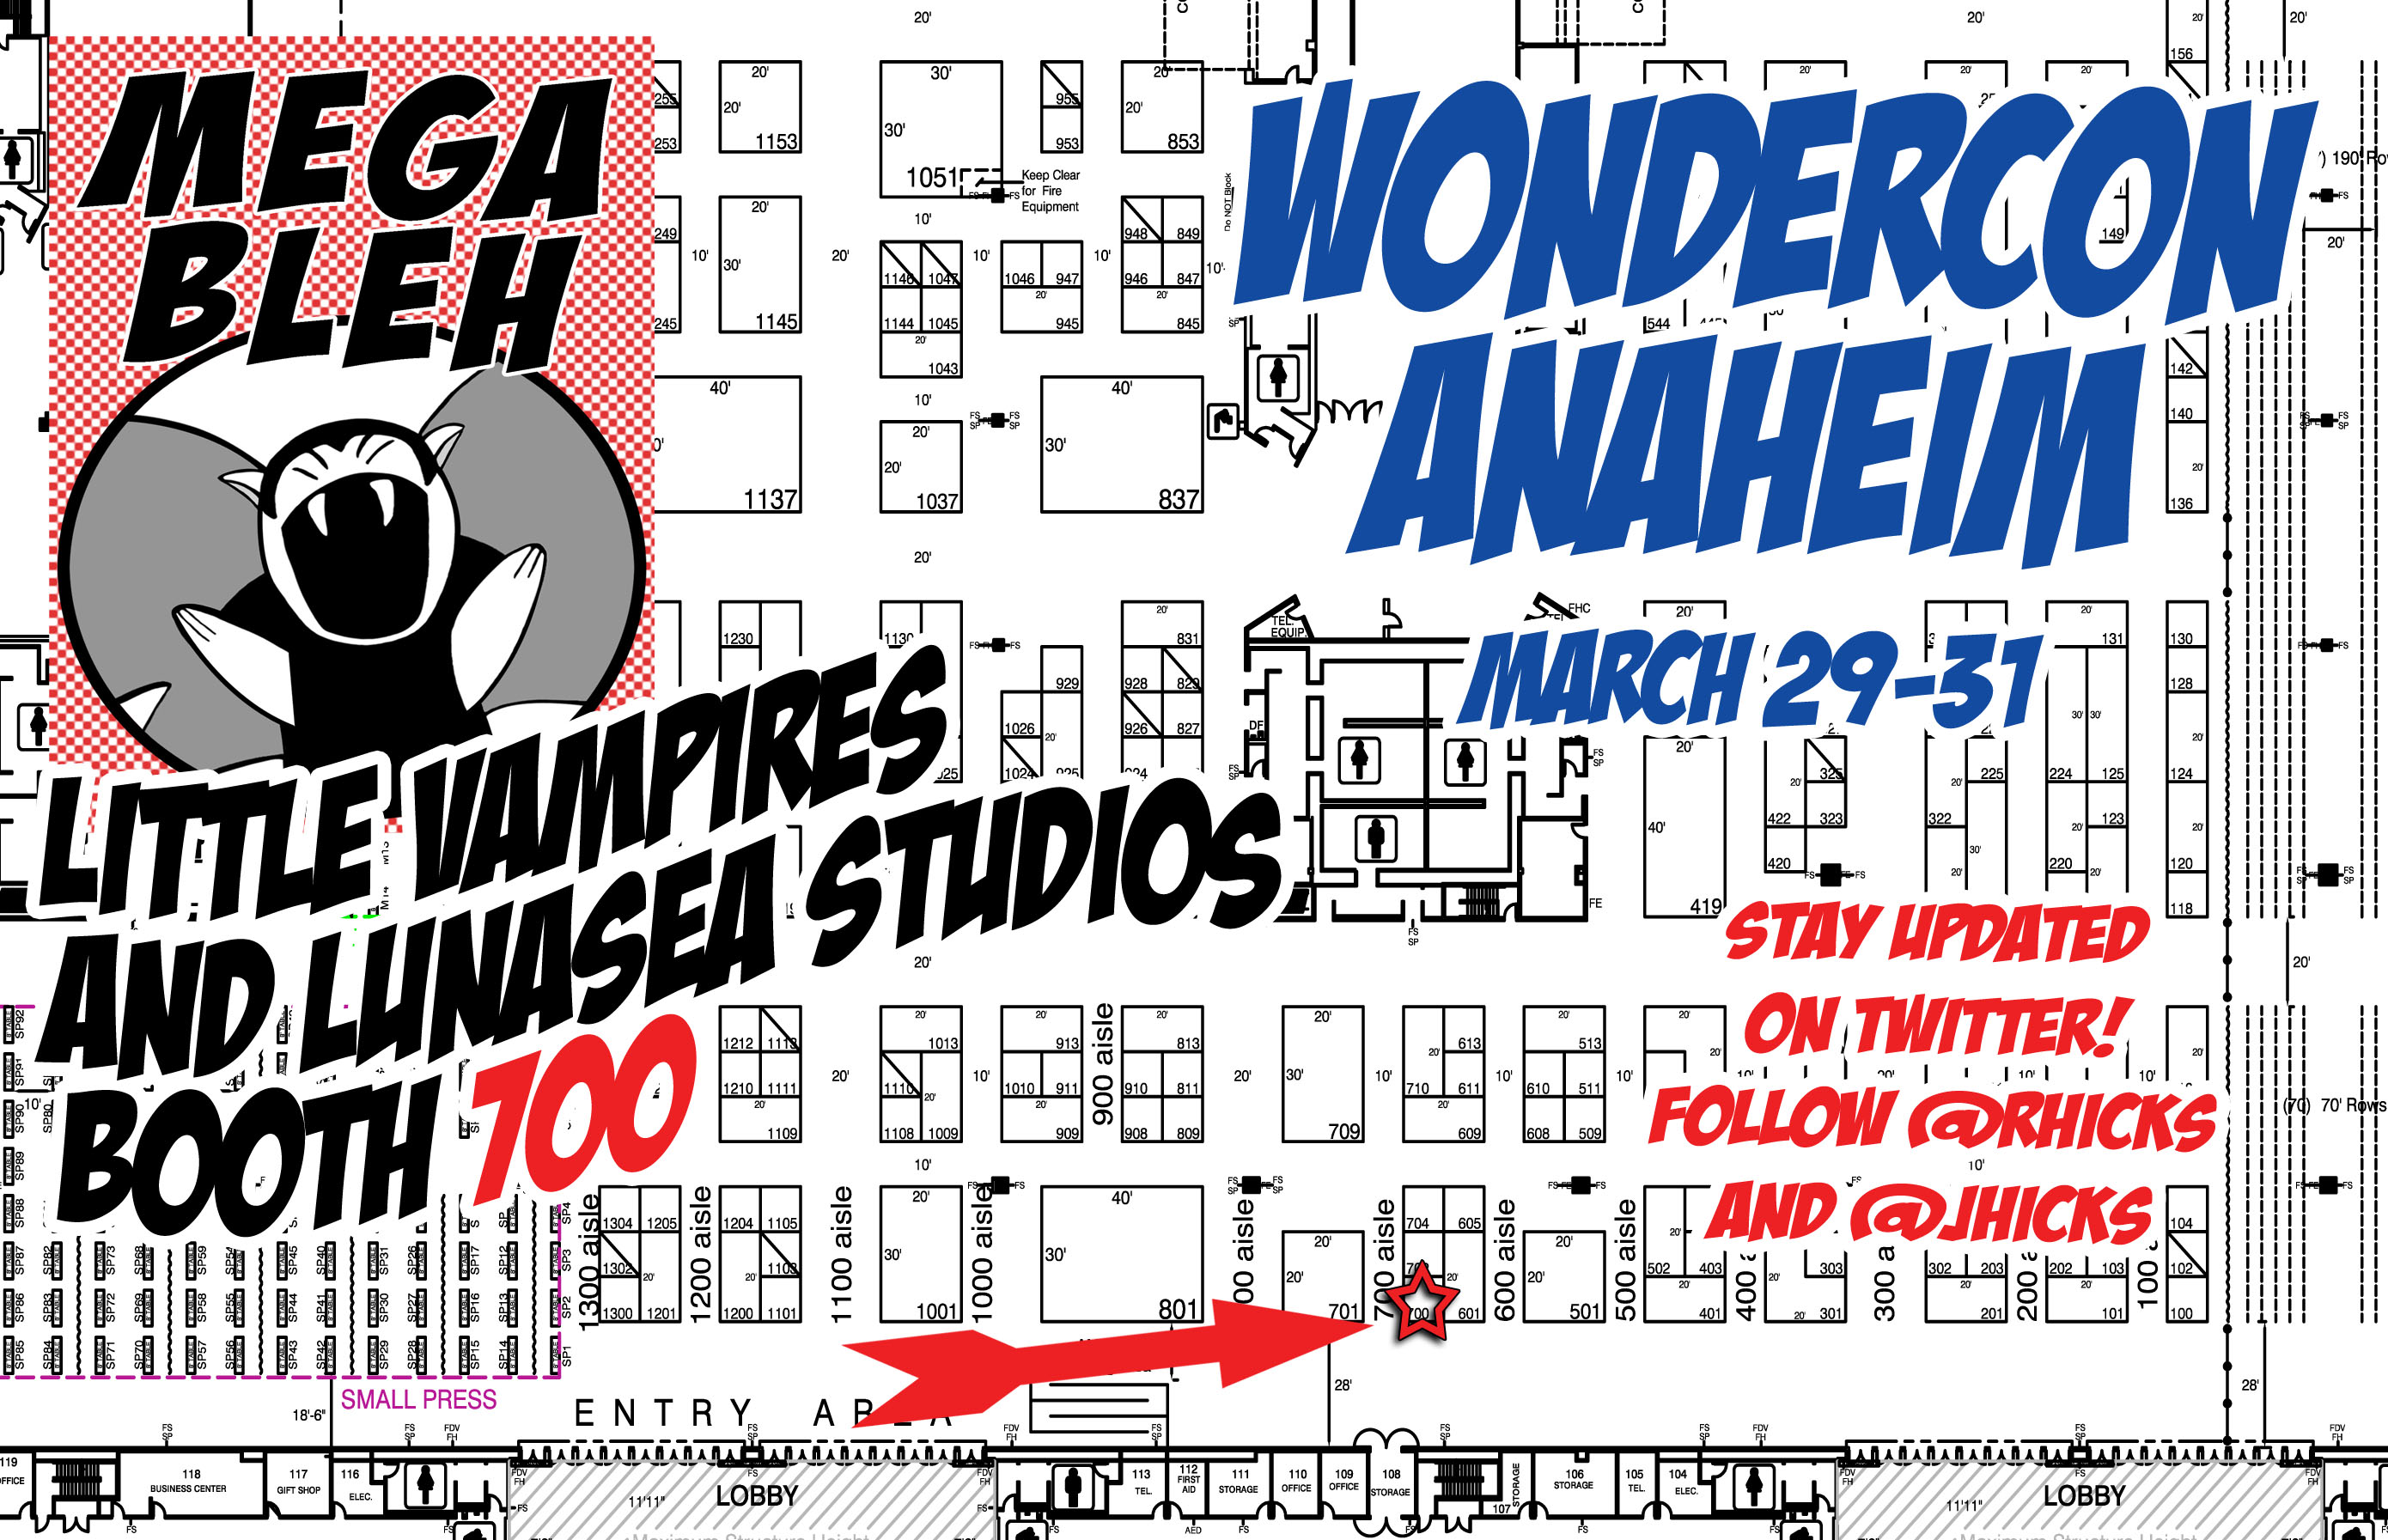 WonderCon Anaheim 2013 exhibitor floor map with the Little Vampires booth highlighted